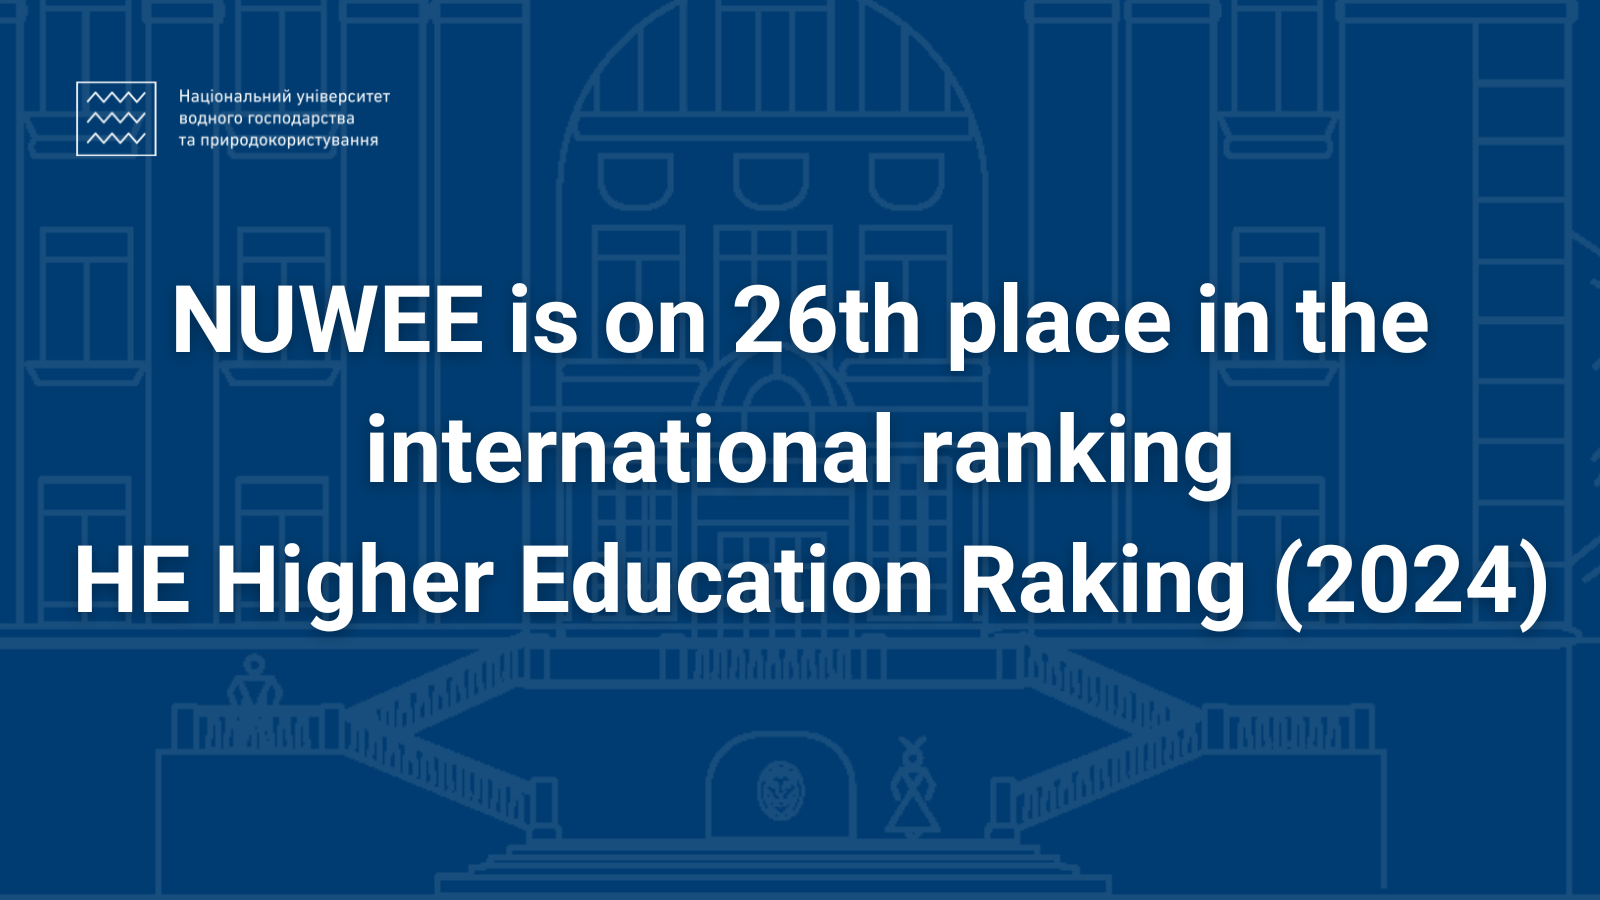 NUWEE is on 26th place in the international ranking